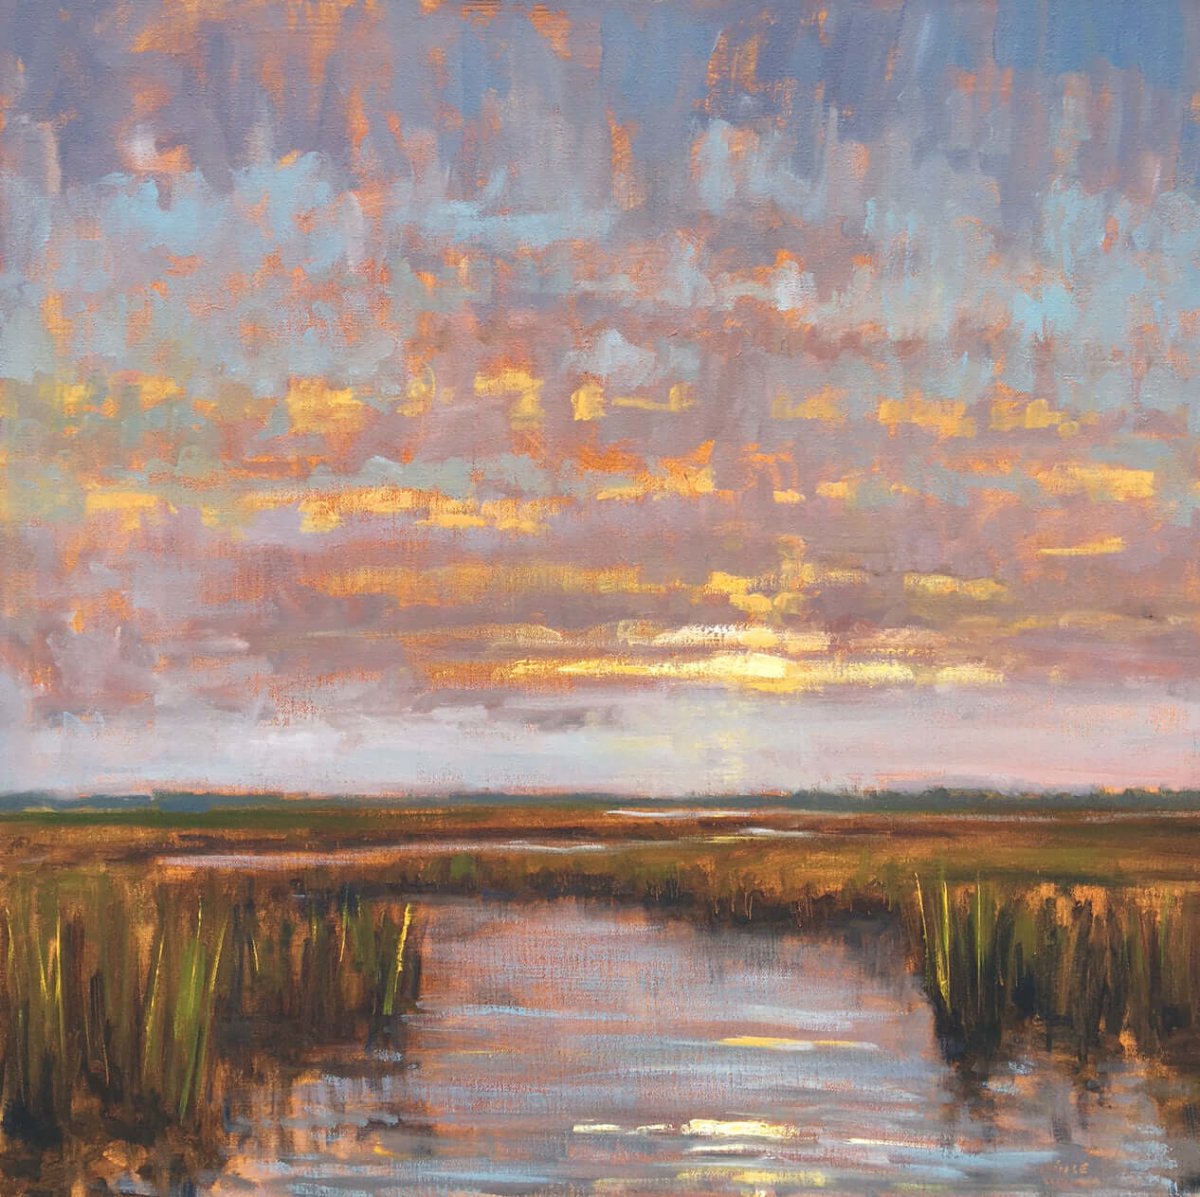 Horizon Hues by Kevin LePrince at LePrince Galleries